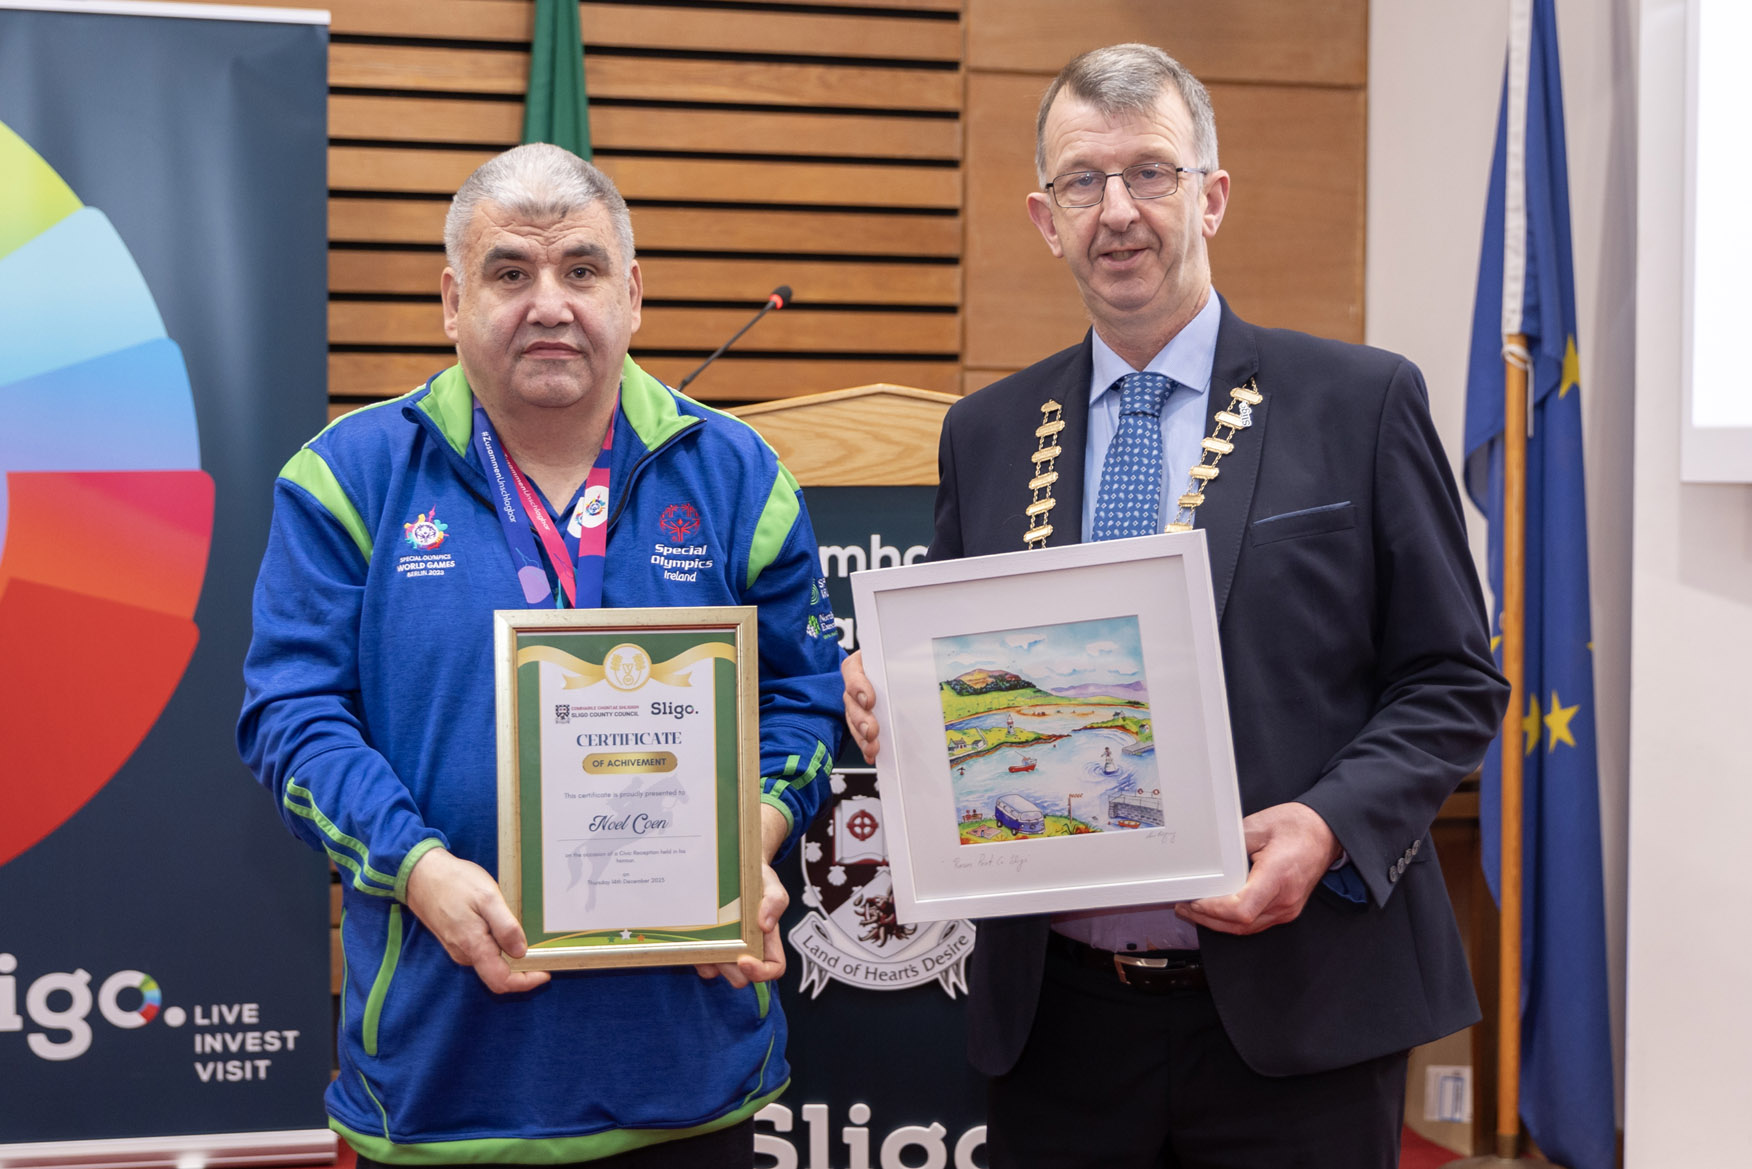 Noel Coen honoured with a Civic Reception